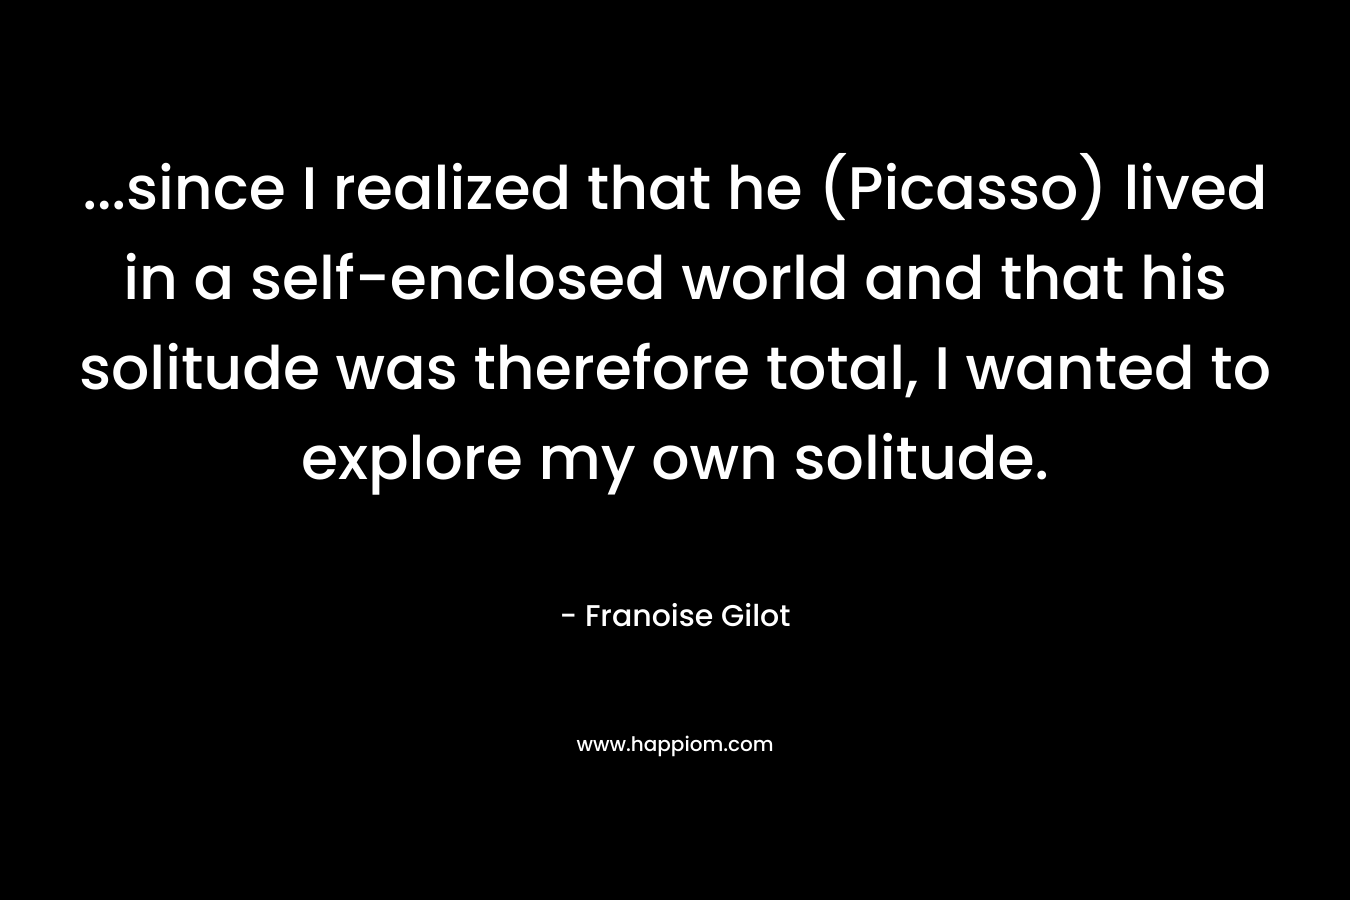 ...since I realized that he (Picasso) lived in a self-enclosed world and that his solitude was therefore total, I wanted to explore my own solitude.